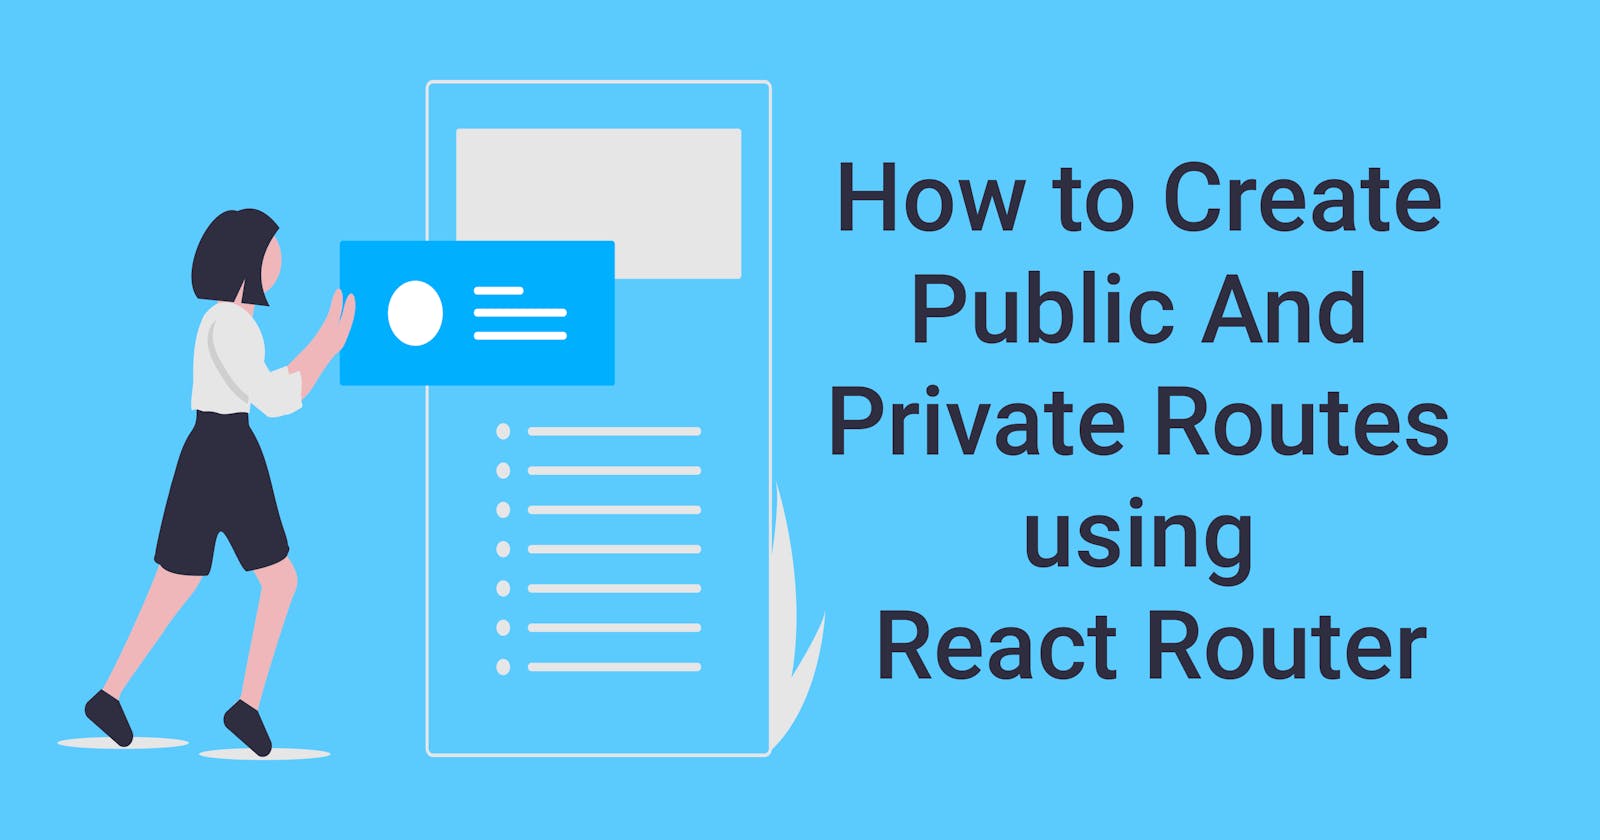 How to Create Public And Private Routes using React Router